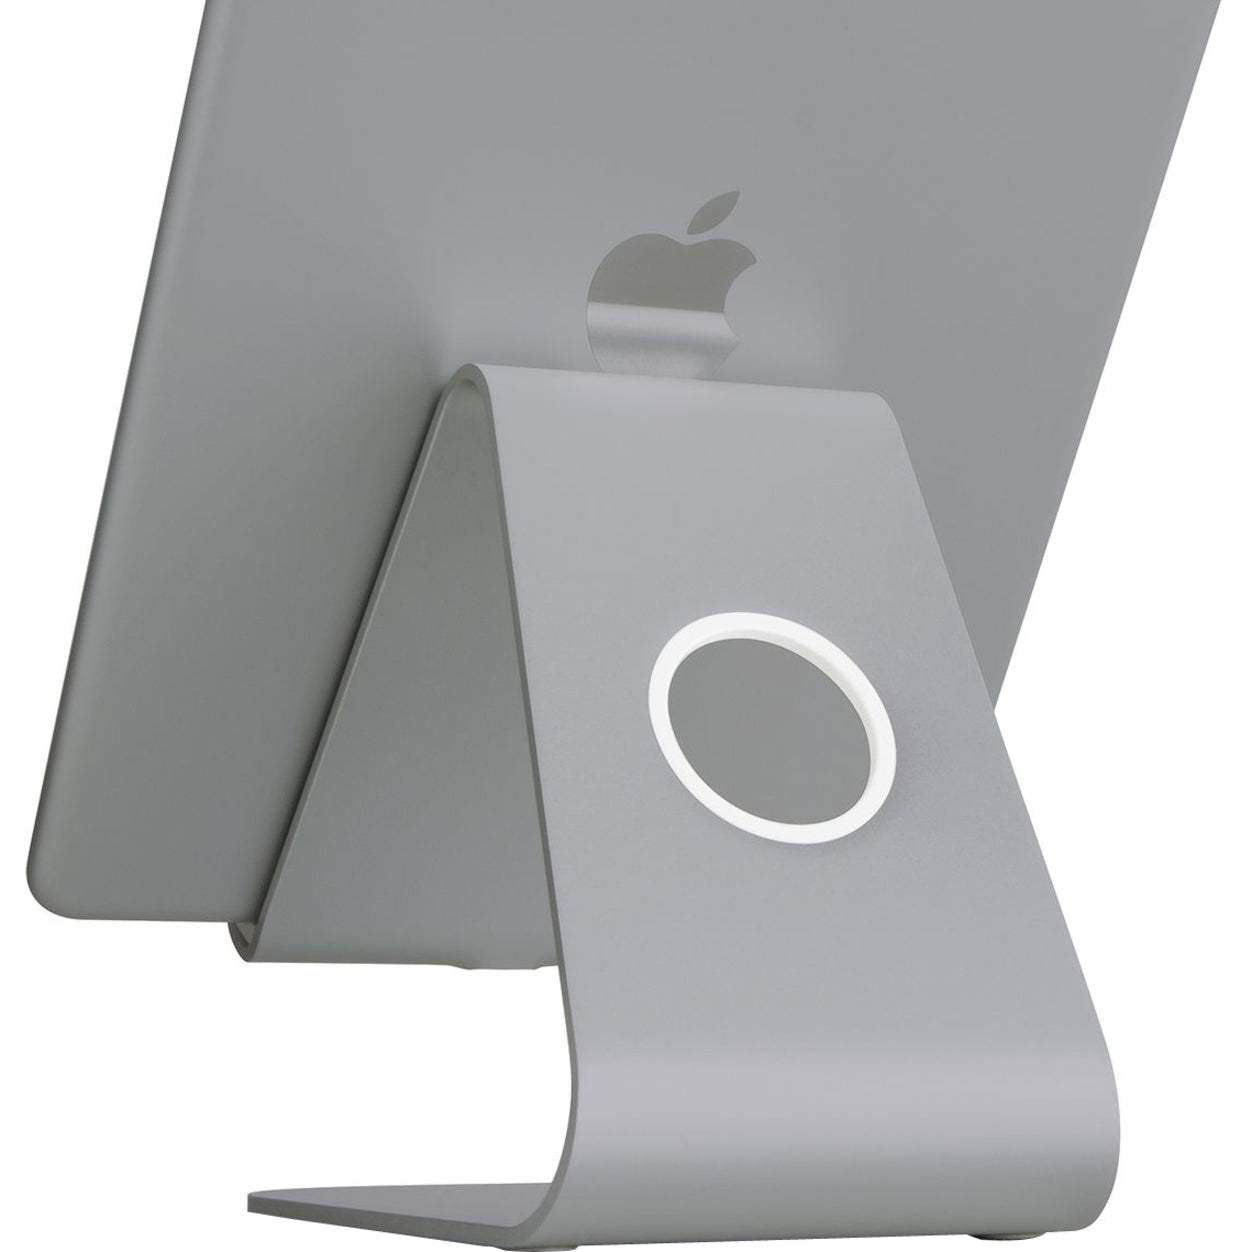 Rain Design 10052 mStand tablet stand- Space Grey, Comfortable, Cable Management